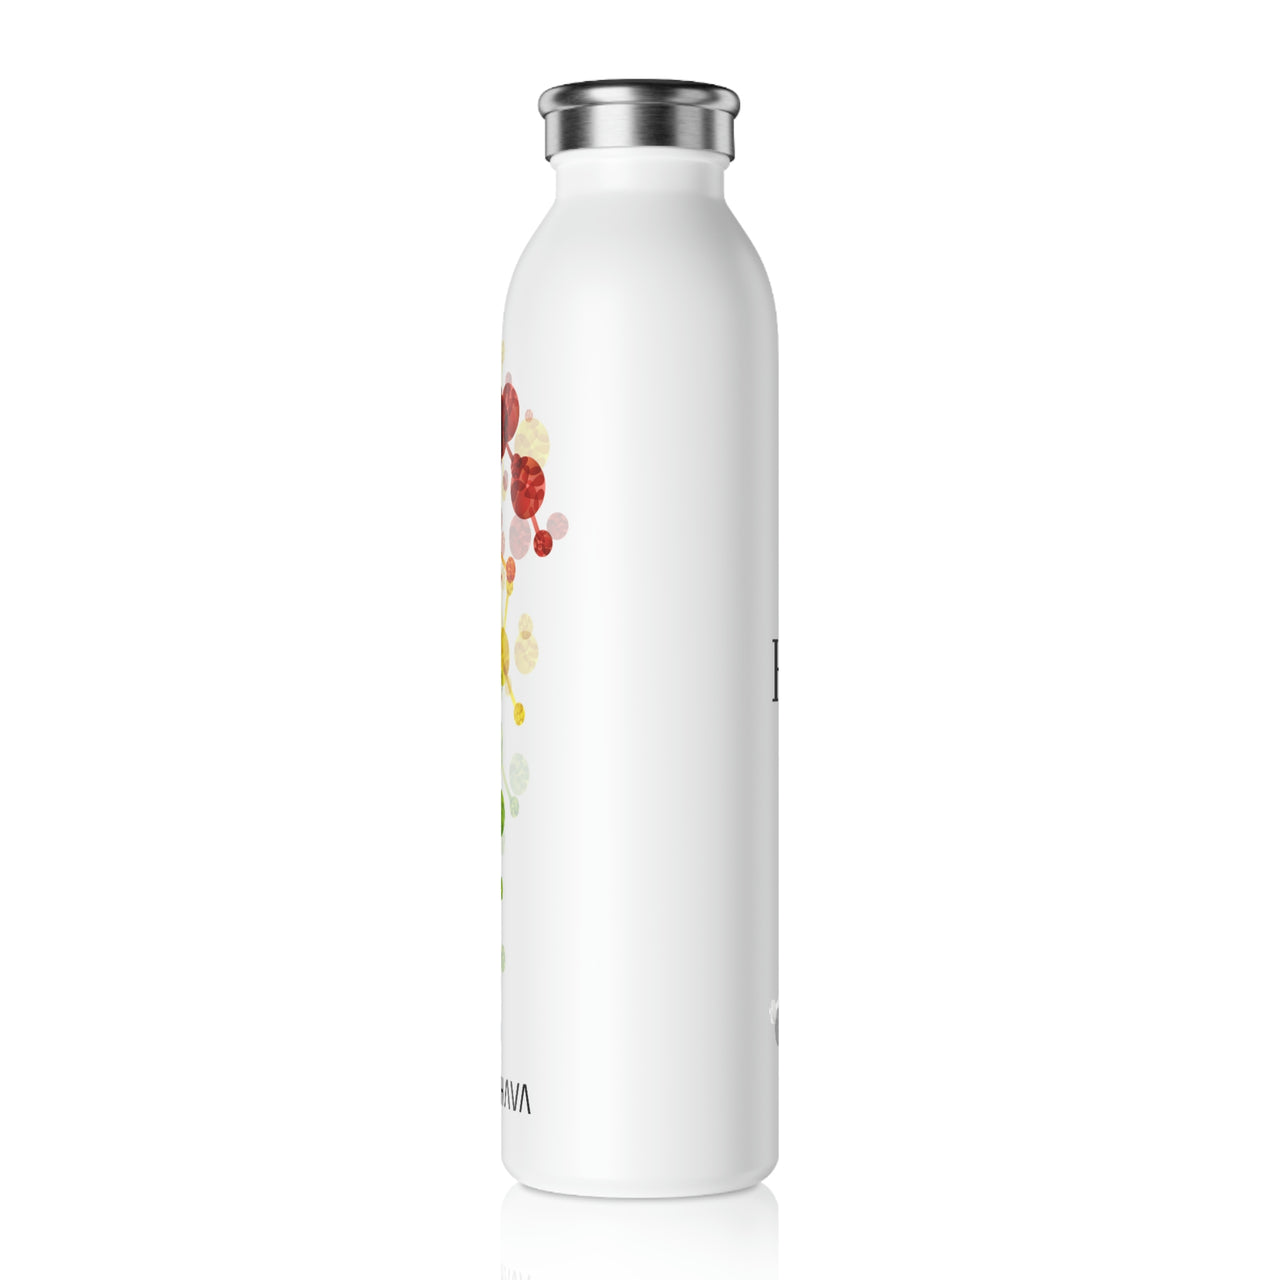 Straight Ally Flag Slim Water Bottle Houston Pride - My Rainbow is In My DNA SHAVA CO